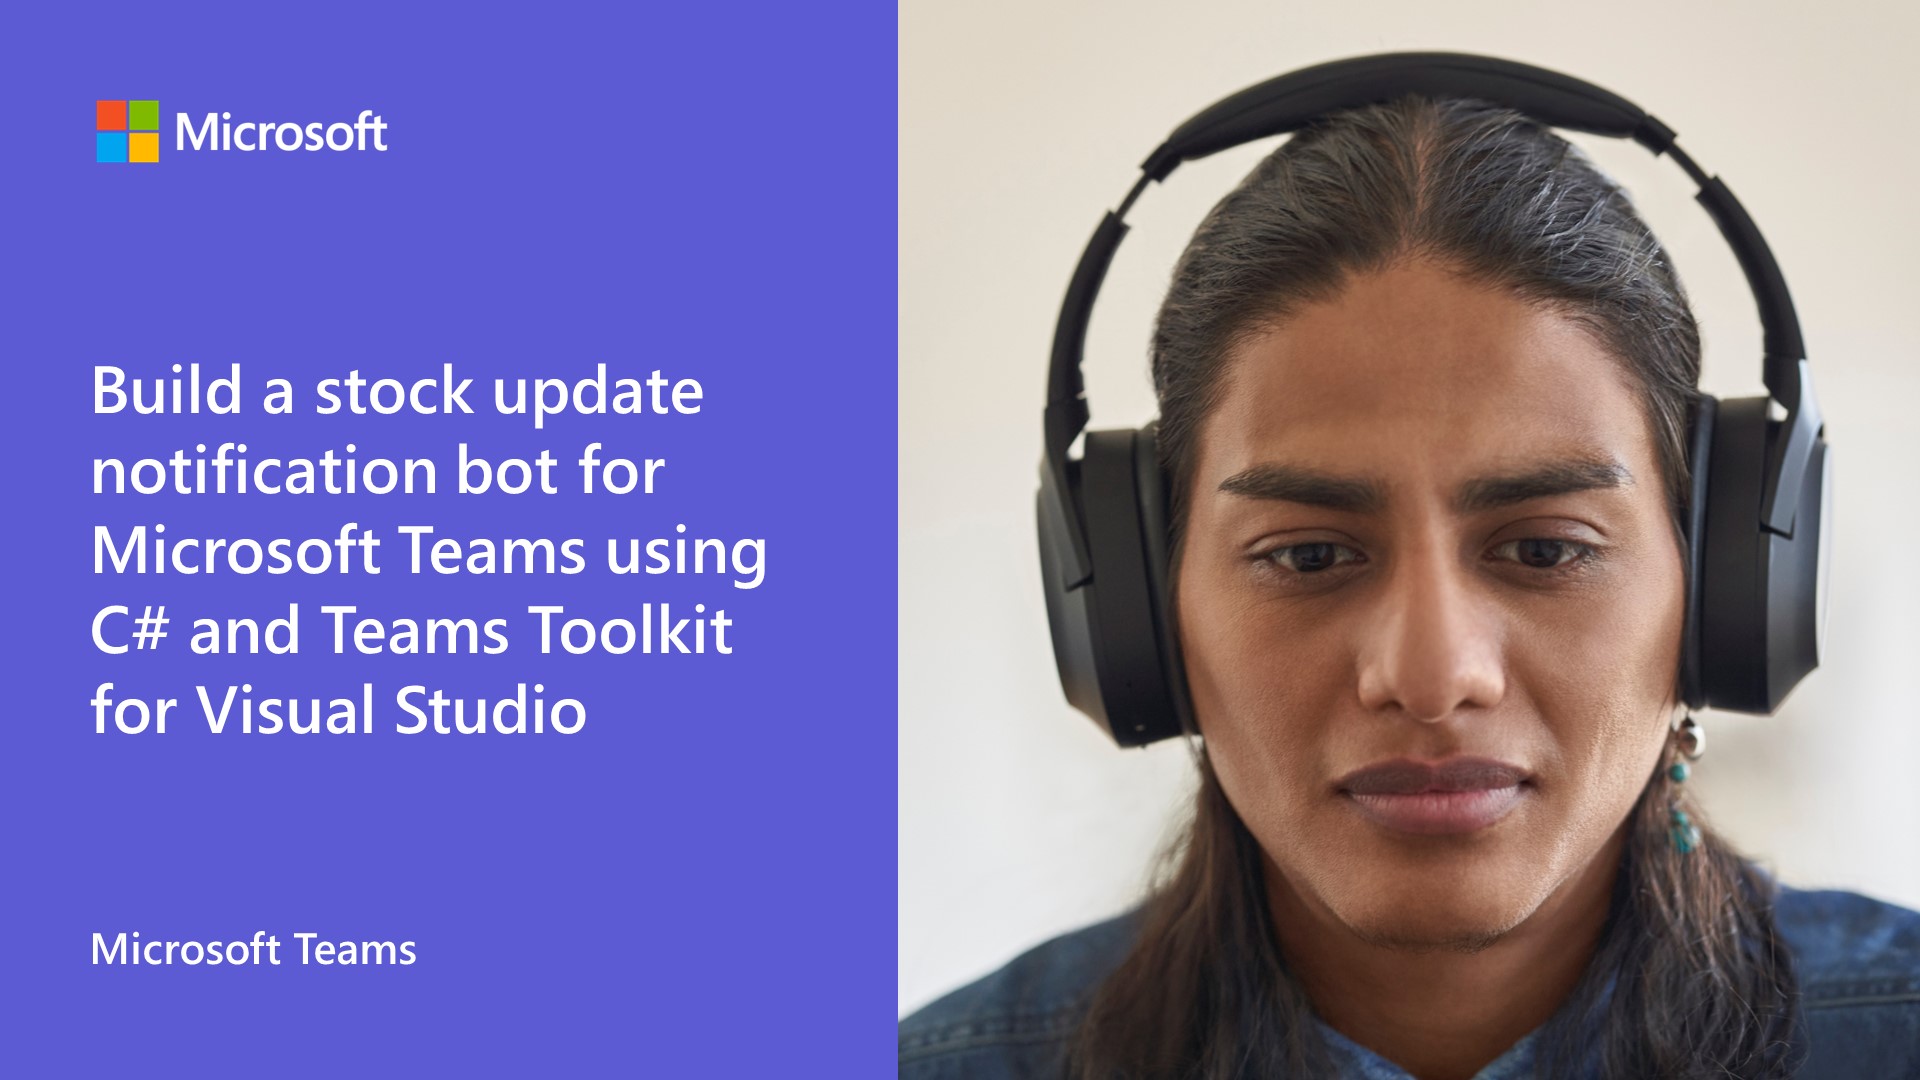 Build a stock update notification bot using C# and Teams Toolkit for Visual Studio